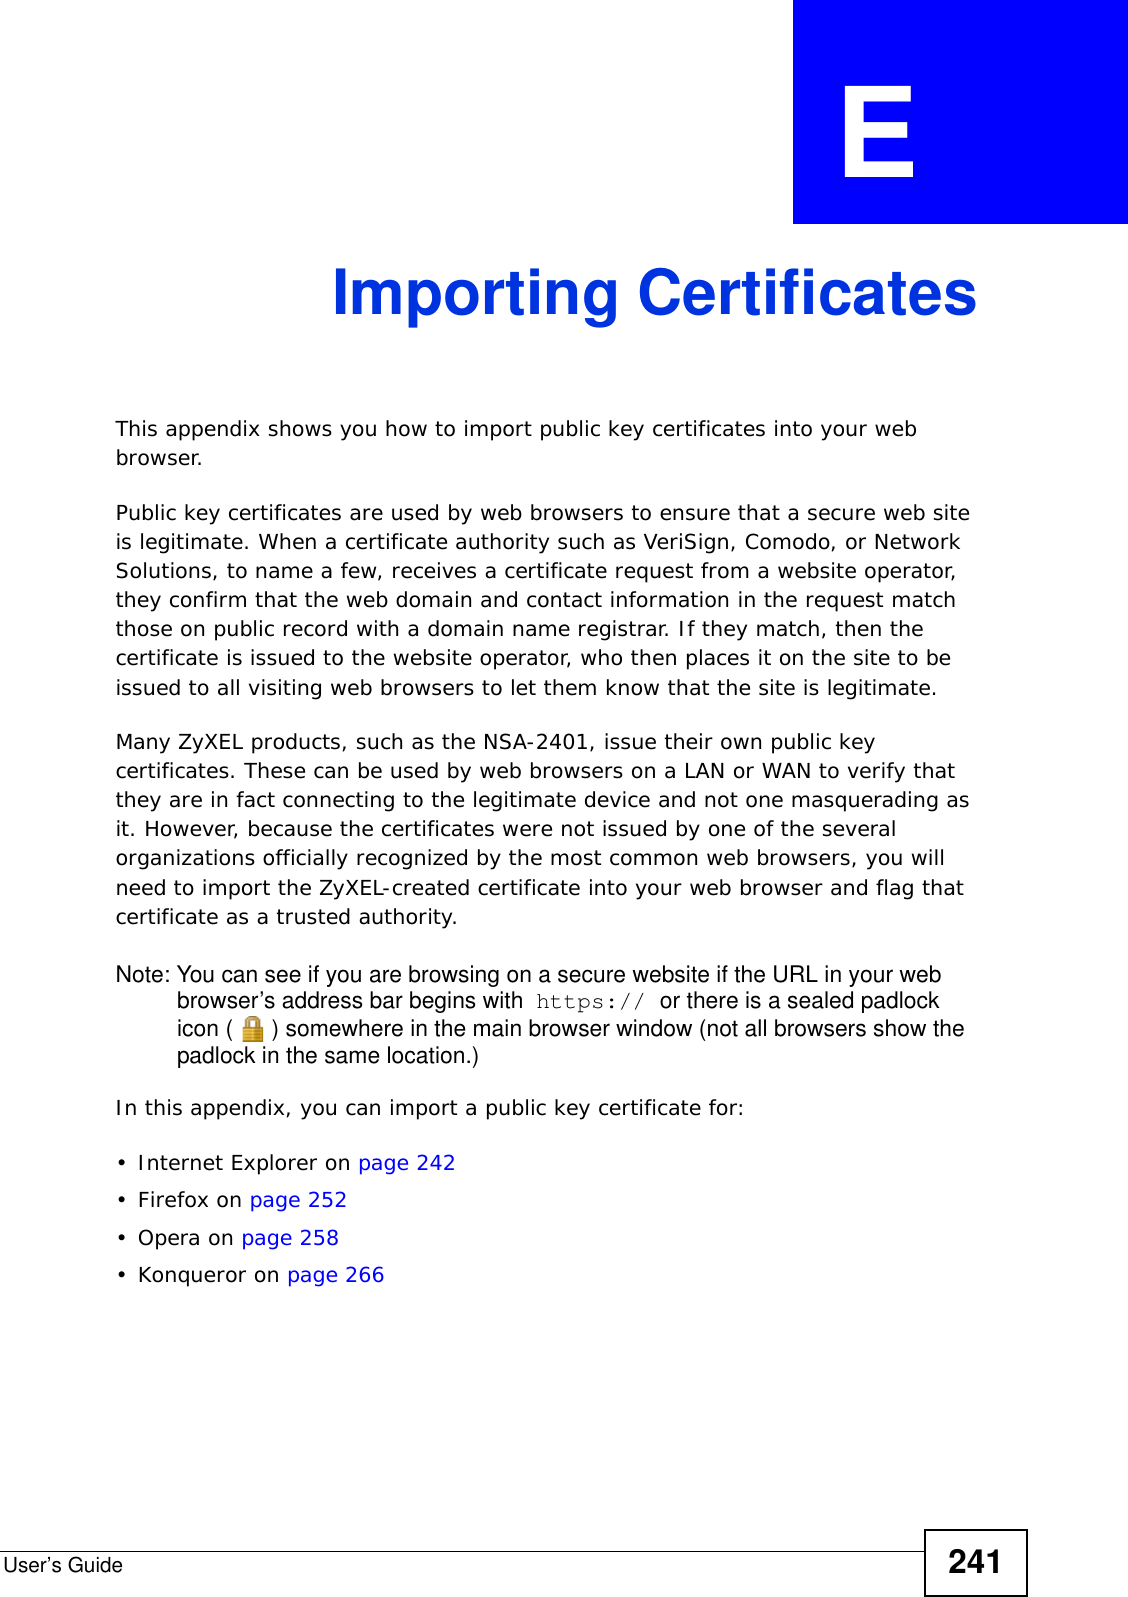 User’s Guide 241APPENDIX  E Importing CertificatesThis appendix shows you how to import public key certificates into your web browser. Public key certificates are used by web browsers to ensure that a secure web site is legitimate. When a certificate authority such as VeriSign, Comodo, or Network Solutions, to name a few, receives a certificate request from a website operator, they confirm that the web domain and contact information in the request match those on public record with a domain name registrar. If they match, then the certificate is issued to the website operator, who then places it on the site to be issued to all visiting web browsers to let them know that the site is legitimate.Many ZyXEL products, such as the NSA-2401, issue their own public key certificates. These can be used by web browsers on a LAN or WAN to verify that they are in fact connecting to the legitimate device and not one masquerading as it. However, because the certificates were not issued by one of the several organizations officially recognized by the most common web browsers, you will need to import the ZyXEL-created certificate into your web browser and flag that certificate as a trusted authority.Note: You can see if you are browsing on a secure website if the URL in your web browser’s address bar begins with  https:// or there is a sealed padlock icon ( ) somewhere in the main browser window (not all browsers show the padlock in the same location.)In this appendix, you can import a public key certificate for:• Internet Explorer on page 242•Firefox on page 252•Opera on page 258• Konqueror on page 266